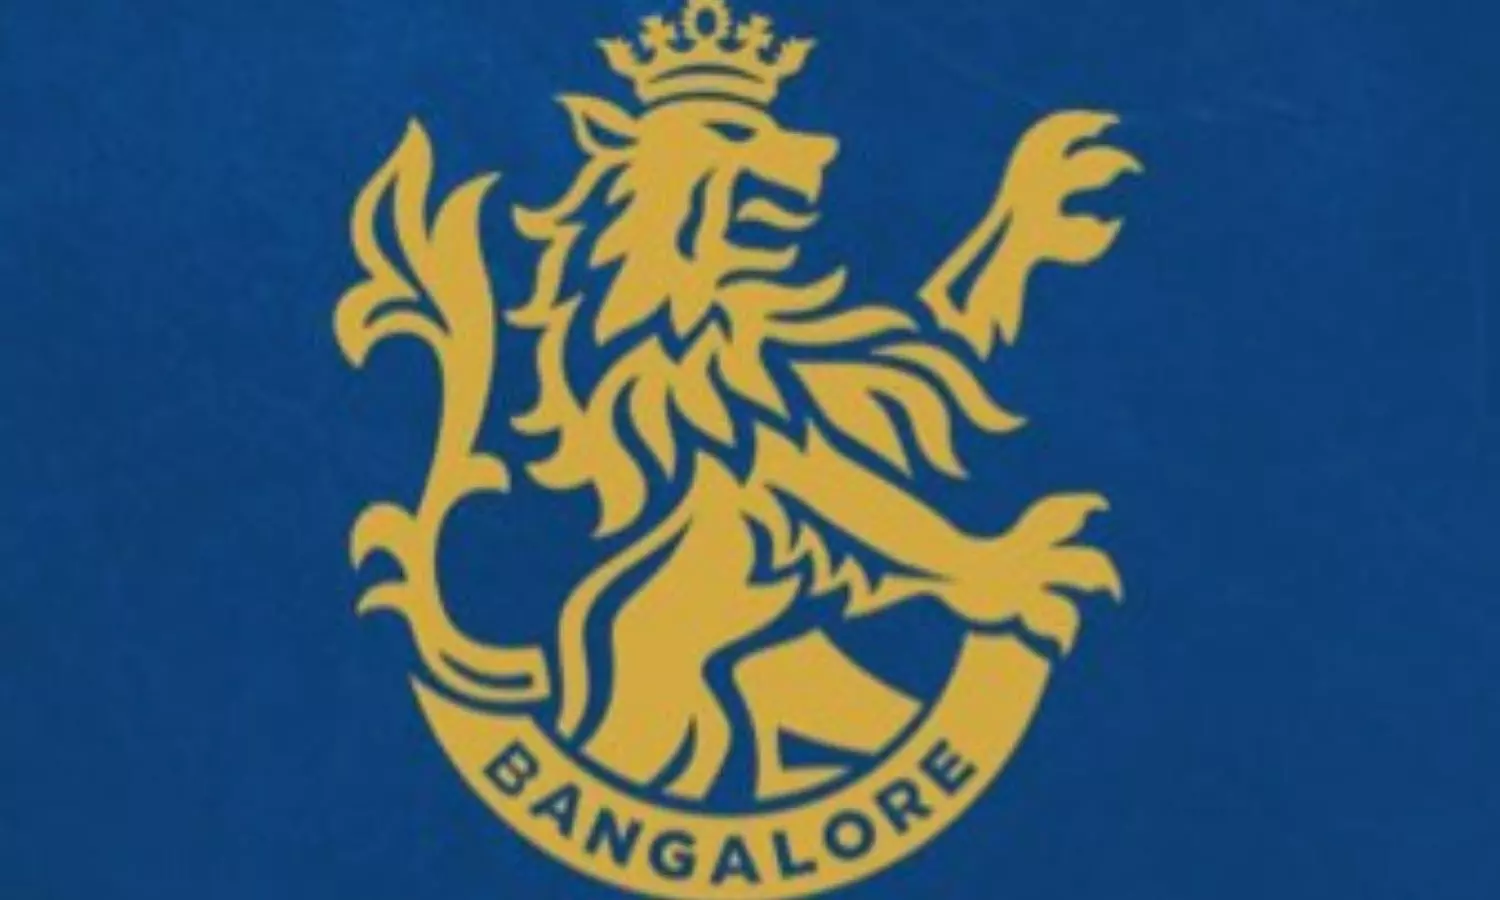 Royal Challengers Bangalore unveil their new logo ahead of IPL 2020